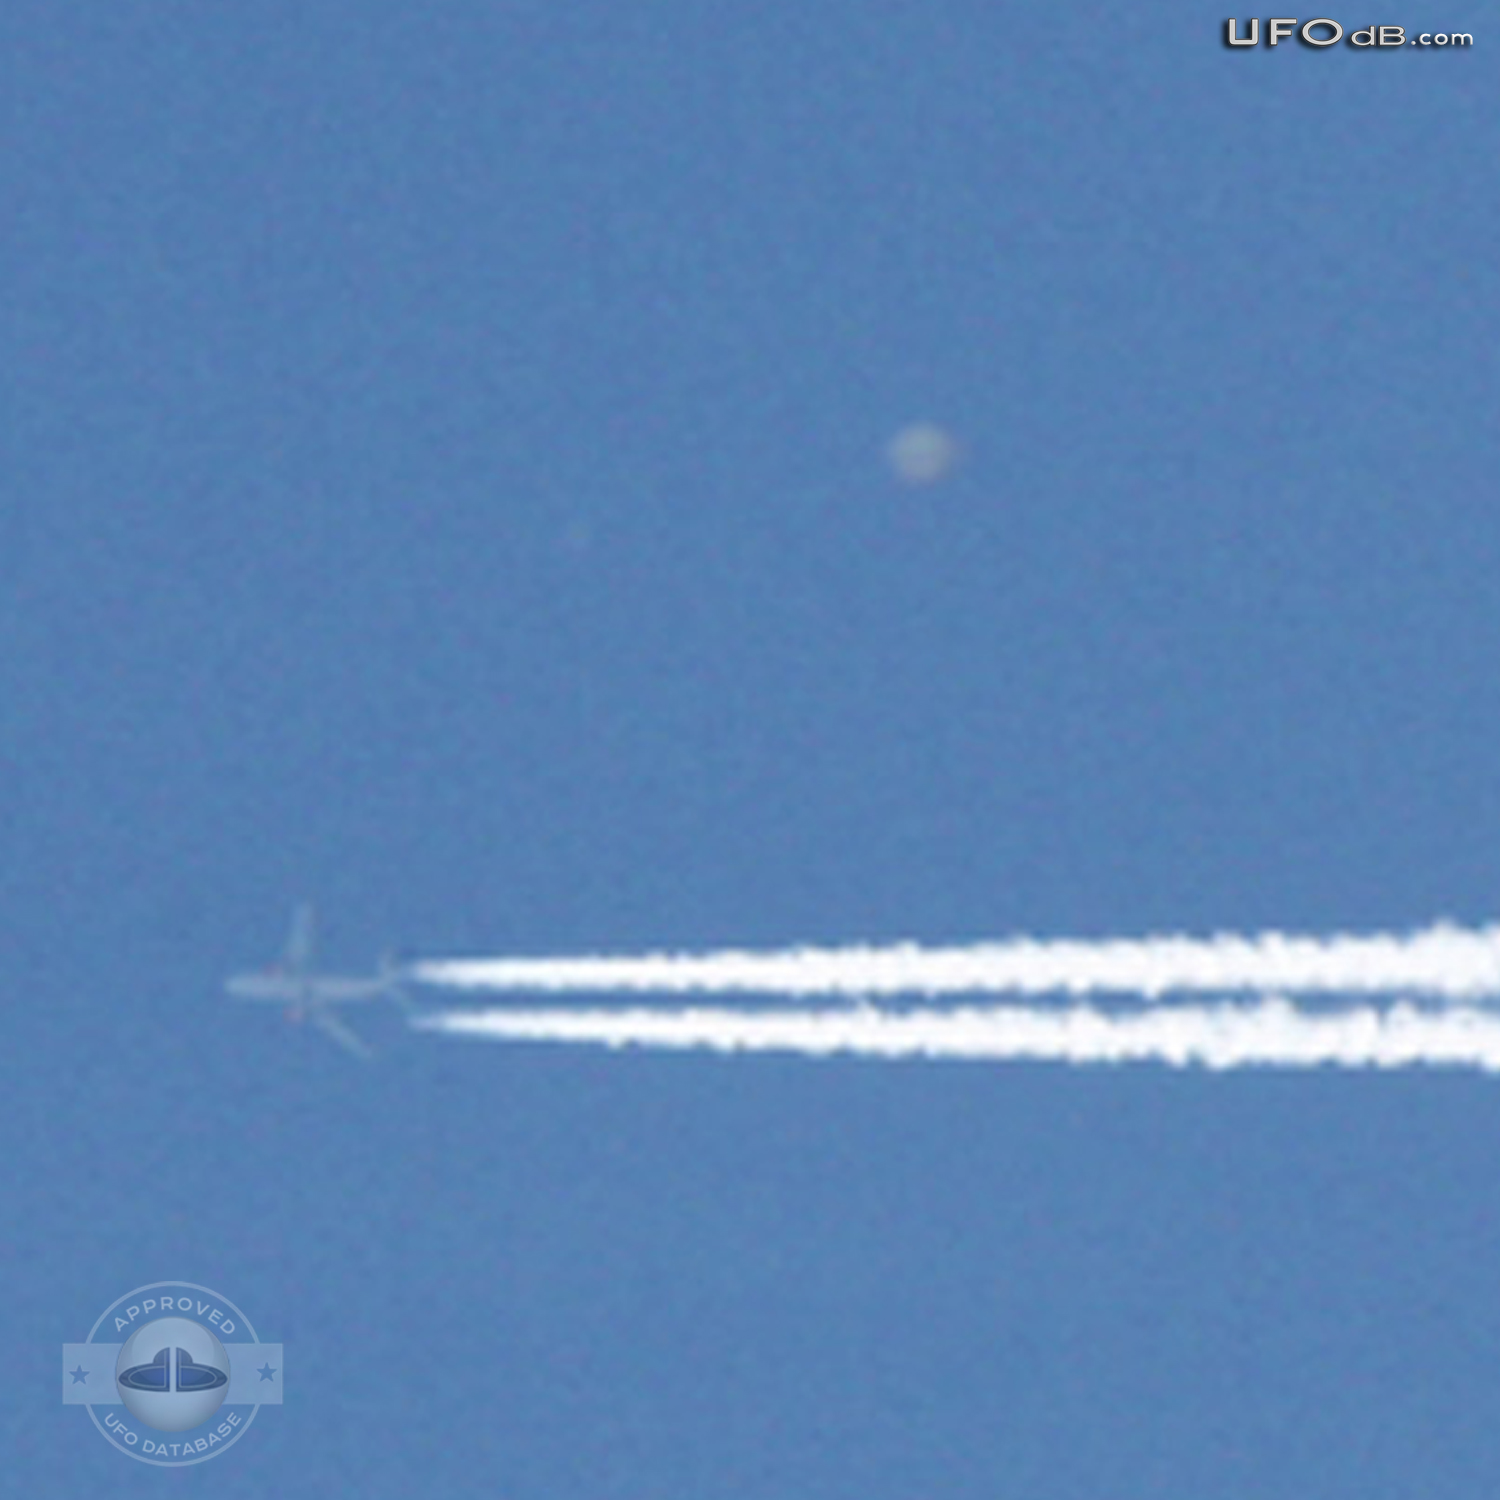 High Altitude UFO near airplane caught on picture Norwich UK May 2011 UFO Picture #309-3